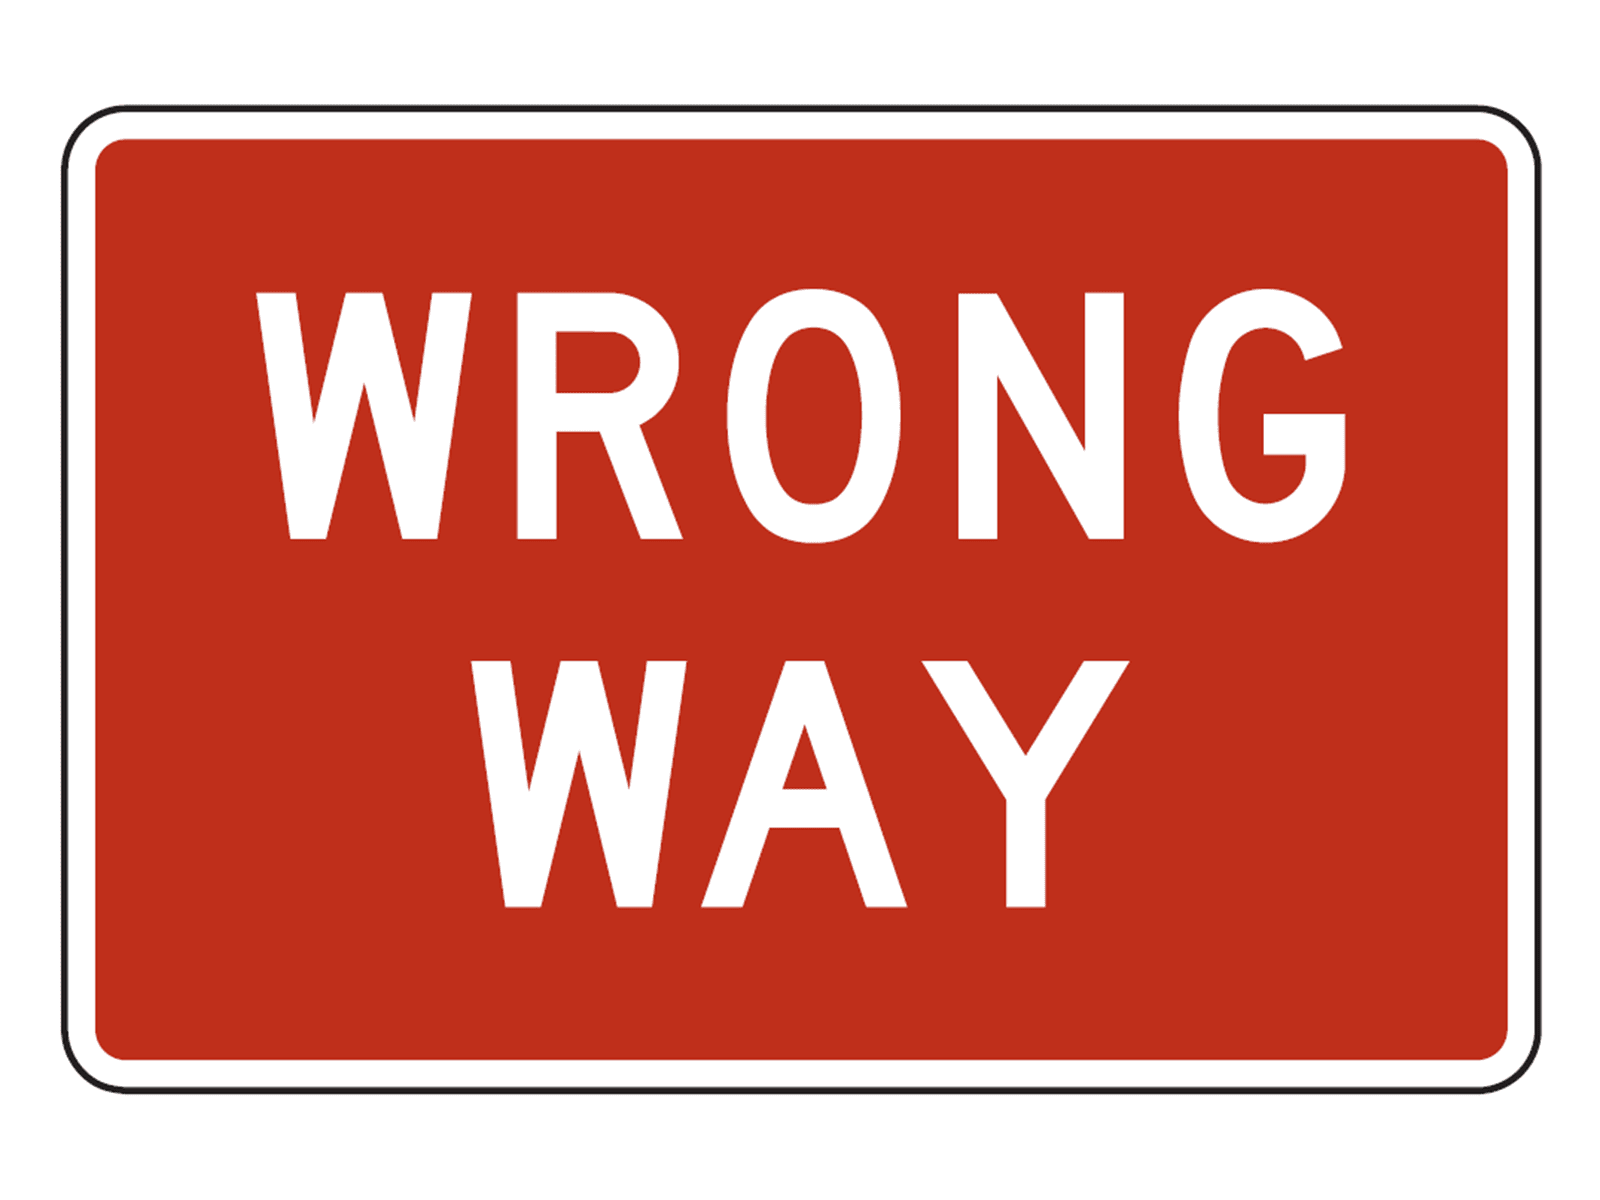 Wrong Way R5-1a - R5: Exclusionary